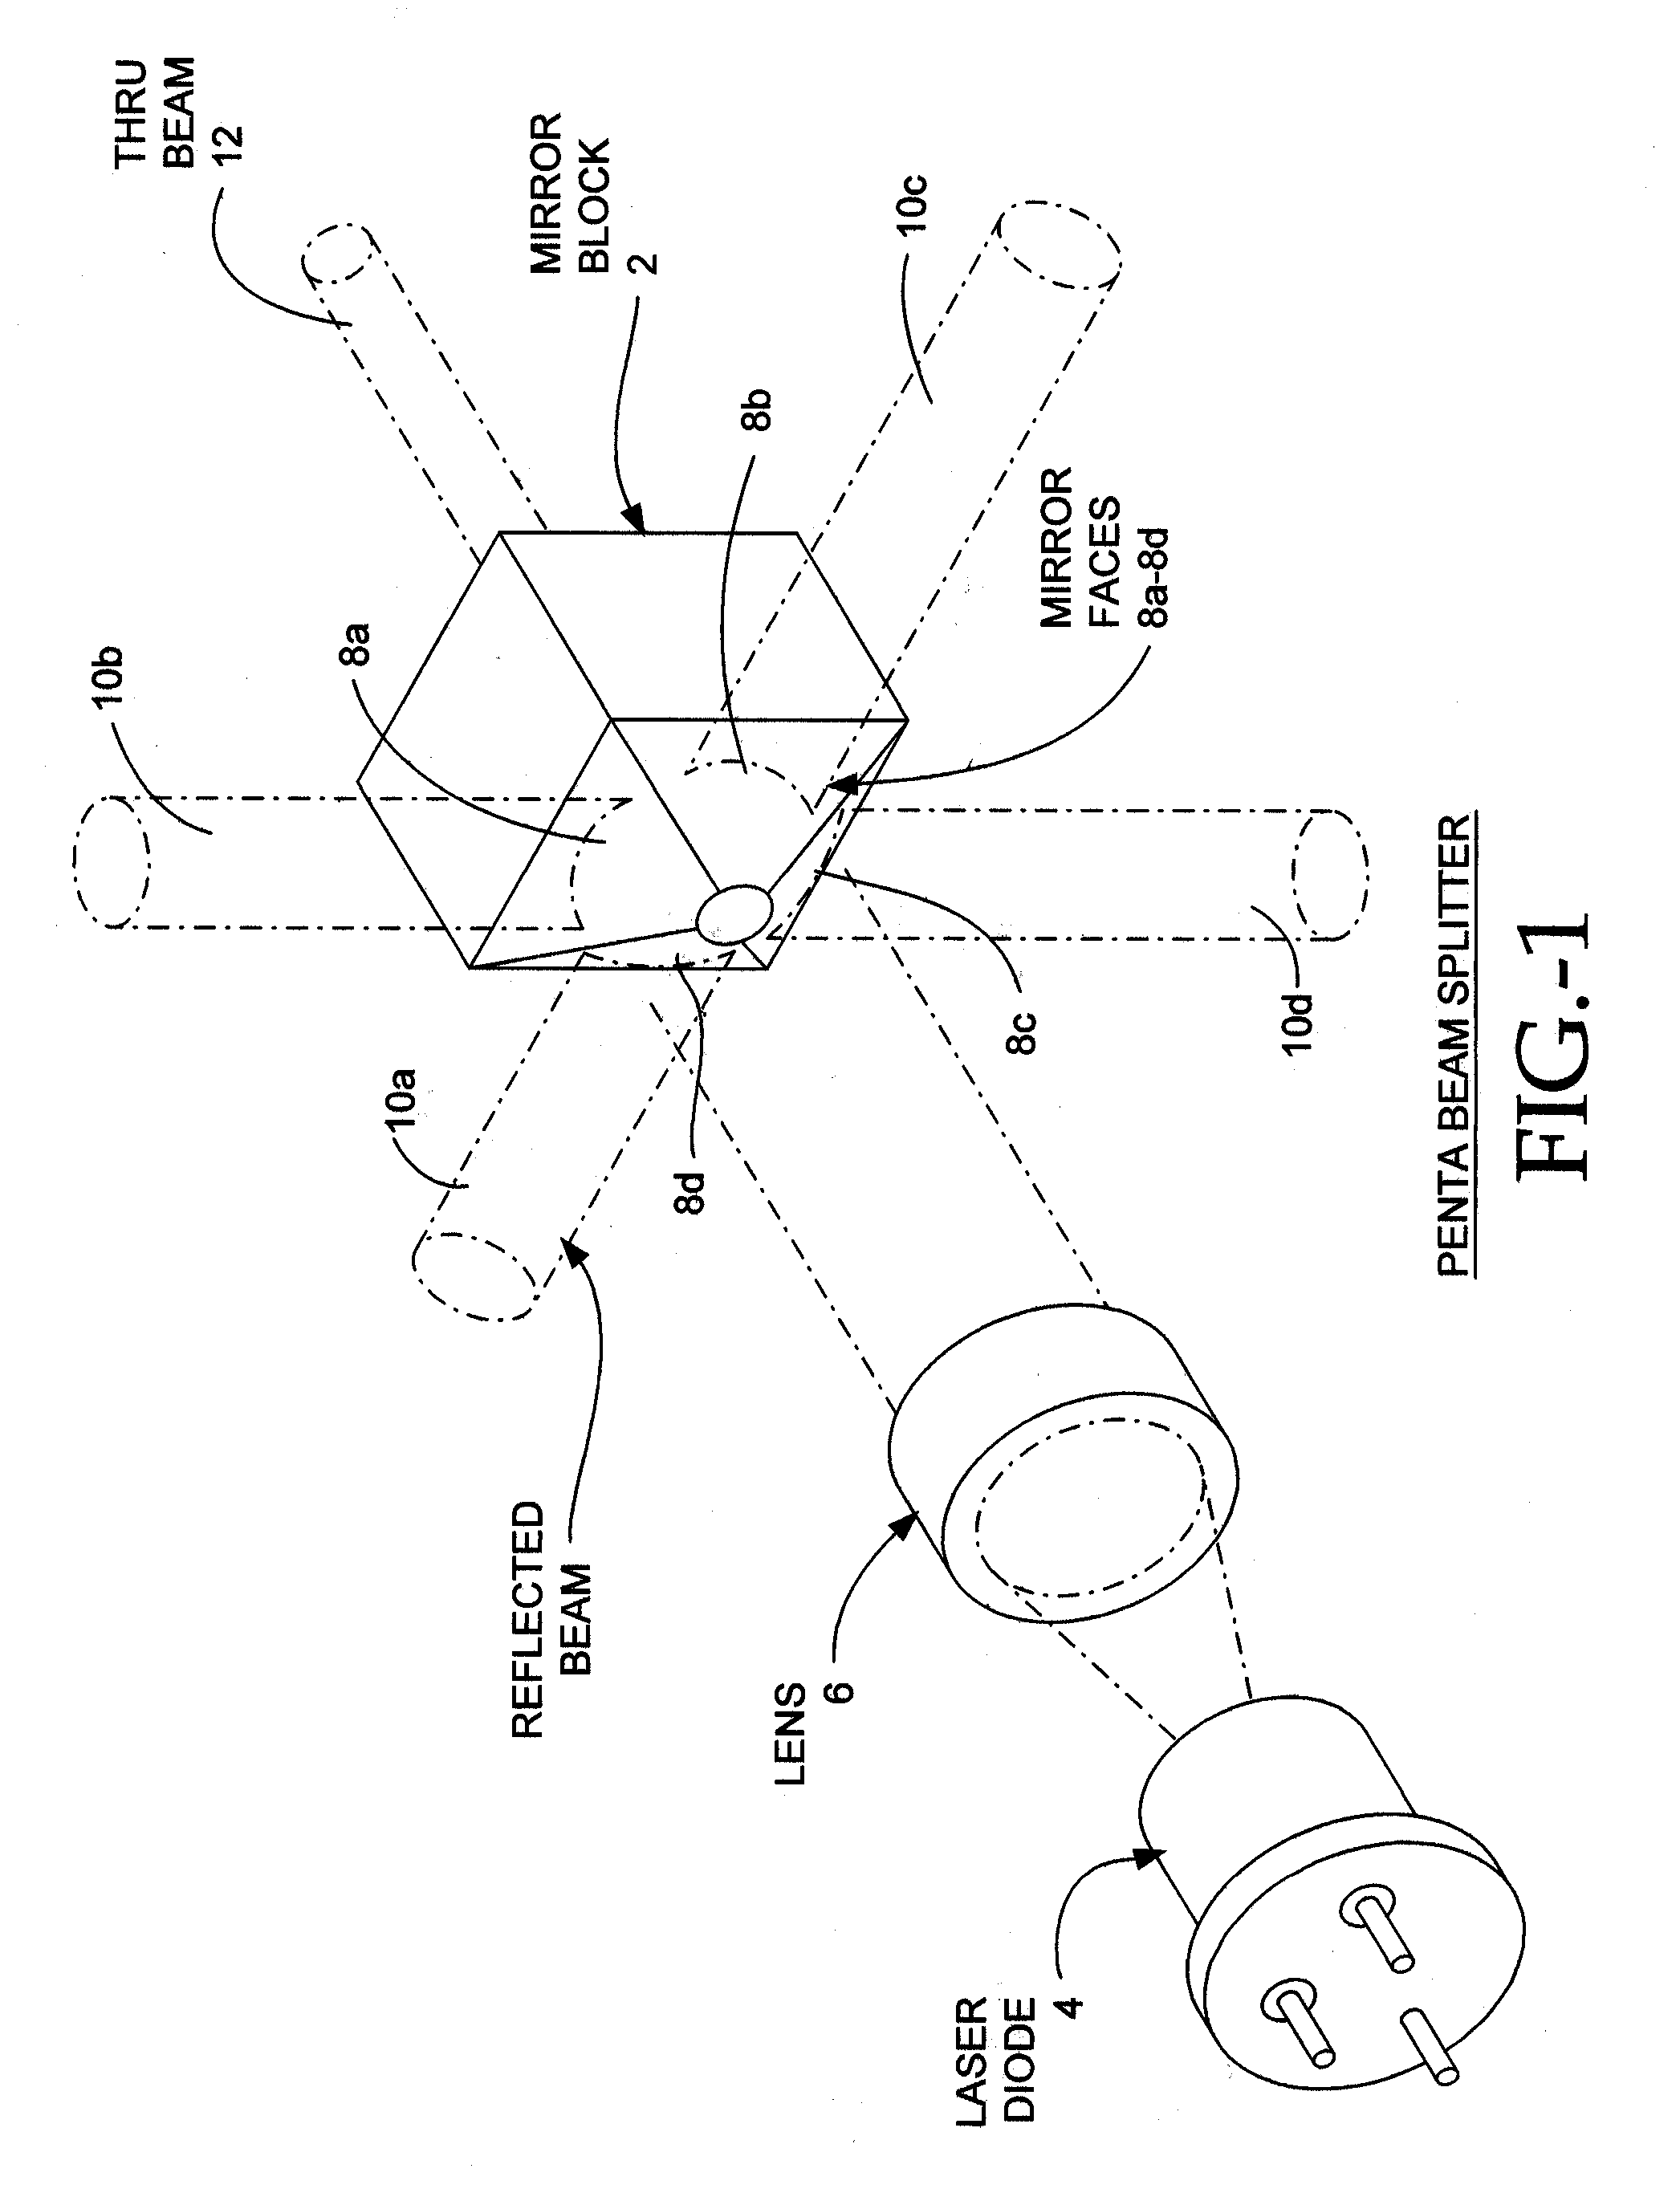 Laser Beam Device With Apertured or Non-Apertured Reflective Element